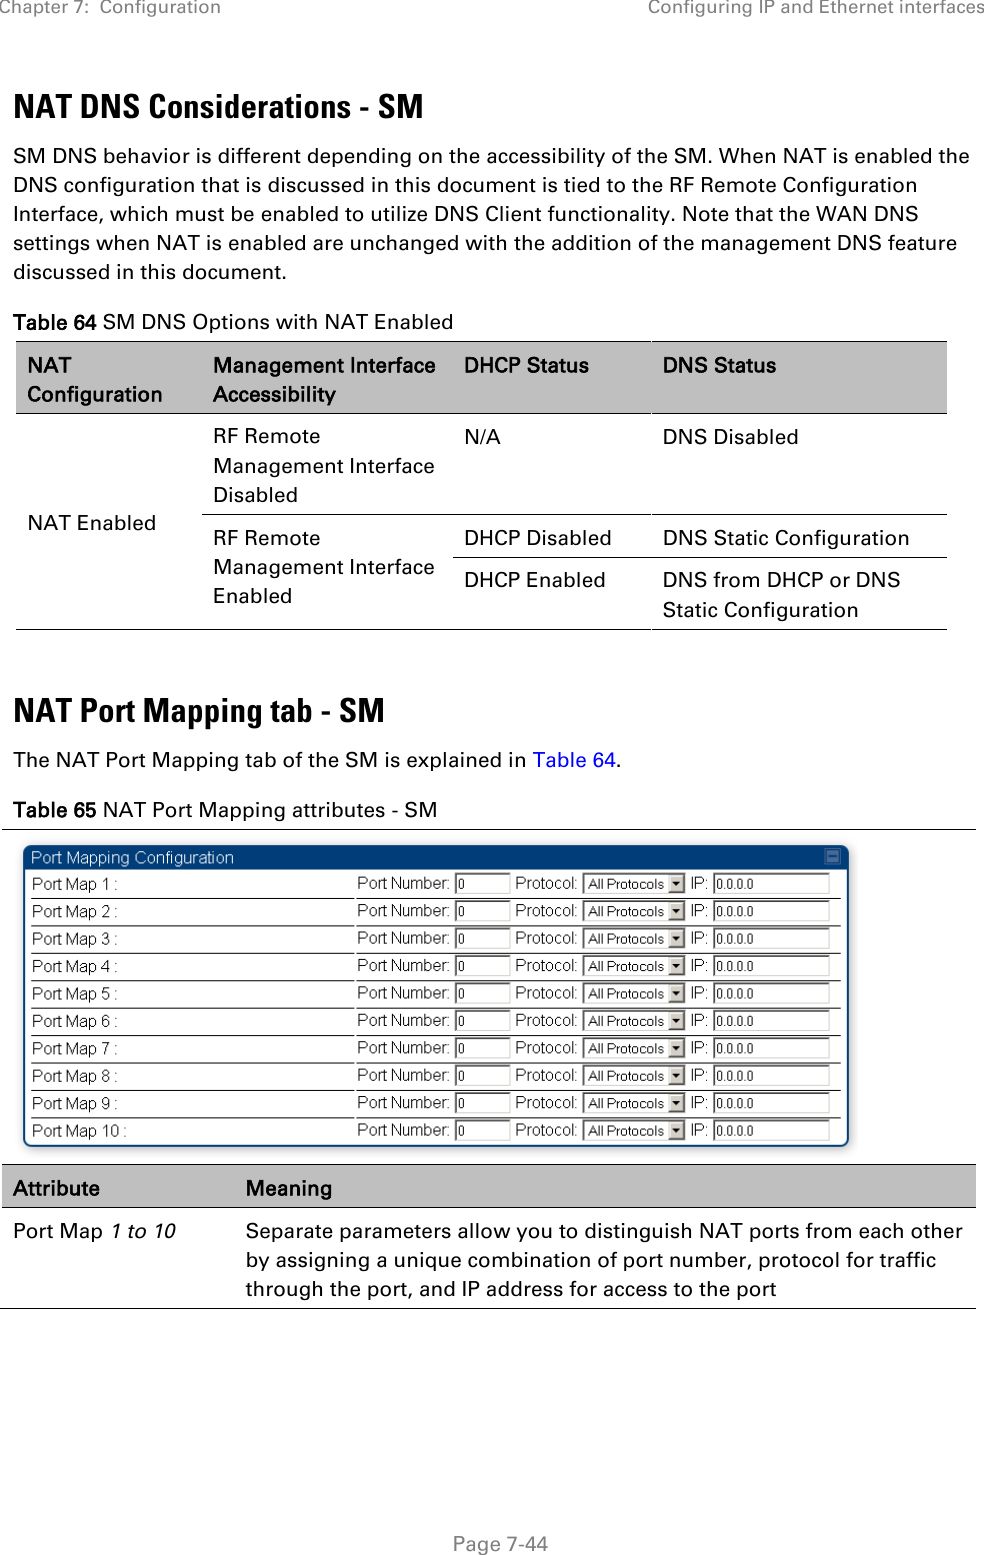 Chapter 7:  Configuration Configuring IP and Ethernet interfaces   Page 7-44 NAT DNS Considerations - SM SM DNS behavior is different depending on the accessibility of the SM. When NAT is enabled the DNS configuration that is discussed in this document is tied to the RF Remote Configuration Interface, which must be enabled to utilize DNS Client functionality. Note that the WAN DNS settings when NAT is enabled are unchanged with the addition of the management DNS feature discussed in this document.  Table 64 SM DNS Options with NAT Enabled NAT Configuration Management Interface Accessibility DHCP Status DNS Status NAT Enabled RF Remote Management Interface Disabled N/A DNS Disabled RF Remote Management Interface Enabled DHCP Disabled DNS Static Configuration DHCP Enabled DNS from DHCP or DNS Static Configuration  NAT Port Mapping tab - SM The NAT Port Mapping tab of the SM is explained in Table 64. Table 65 NAT Port Mapping attributes - SM  Attribute Meaning Port Map 1 to 10 Separate parameters allow you to distinguish NAT ports from each other by assigning a unique combination of port number, protocol for traffic through the port, and IP address for access to the port   